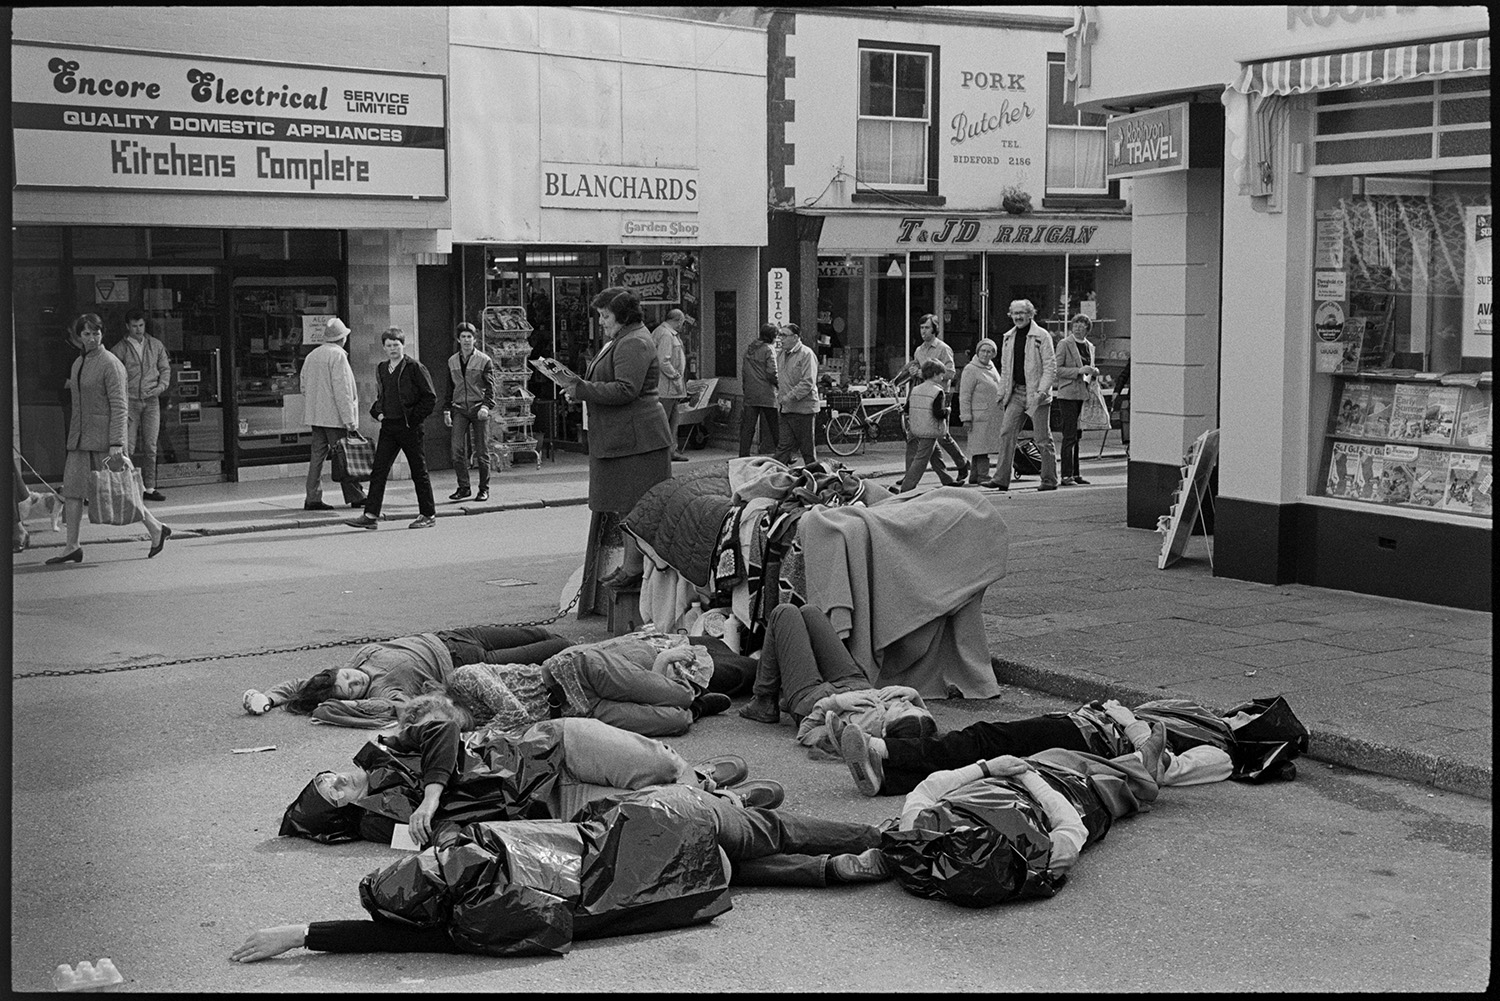 Women's peace movement demonstration, drama and singing songs, photographer. 
[A women's anti-nuclear demonstration in Mill Street, Bideford. The women are lying on the ground, whilst another woman reads from a booklet Shoppers walking past are looking at the demonstration. Shop fronts including Blanchards and Encore Electrical are visible on the opposite side of the street.]